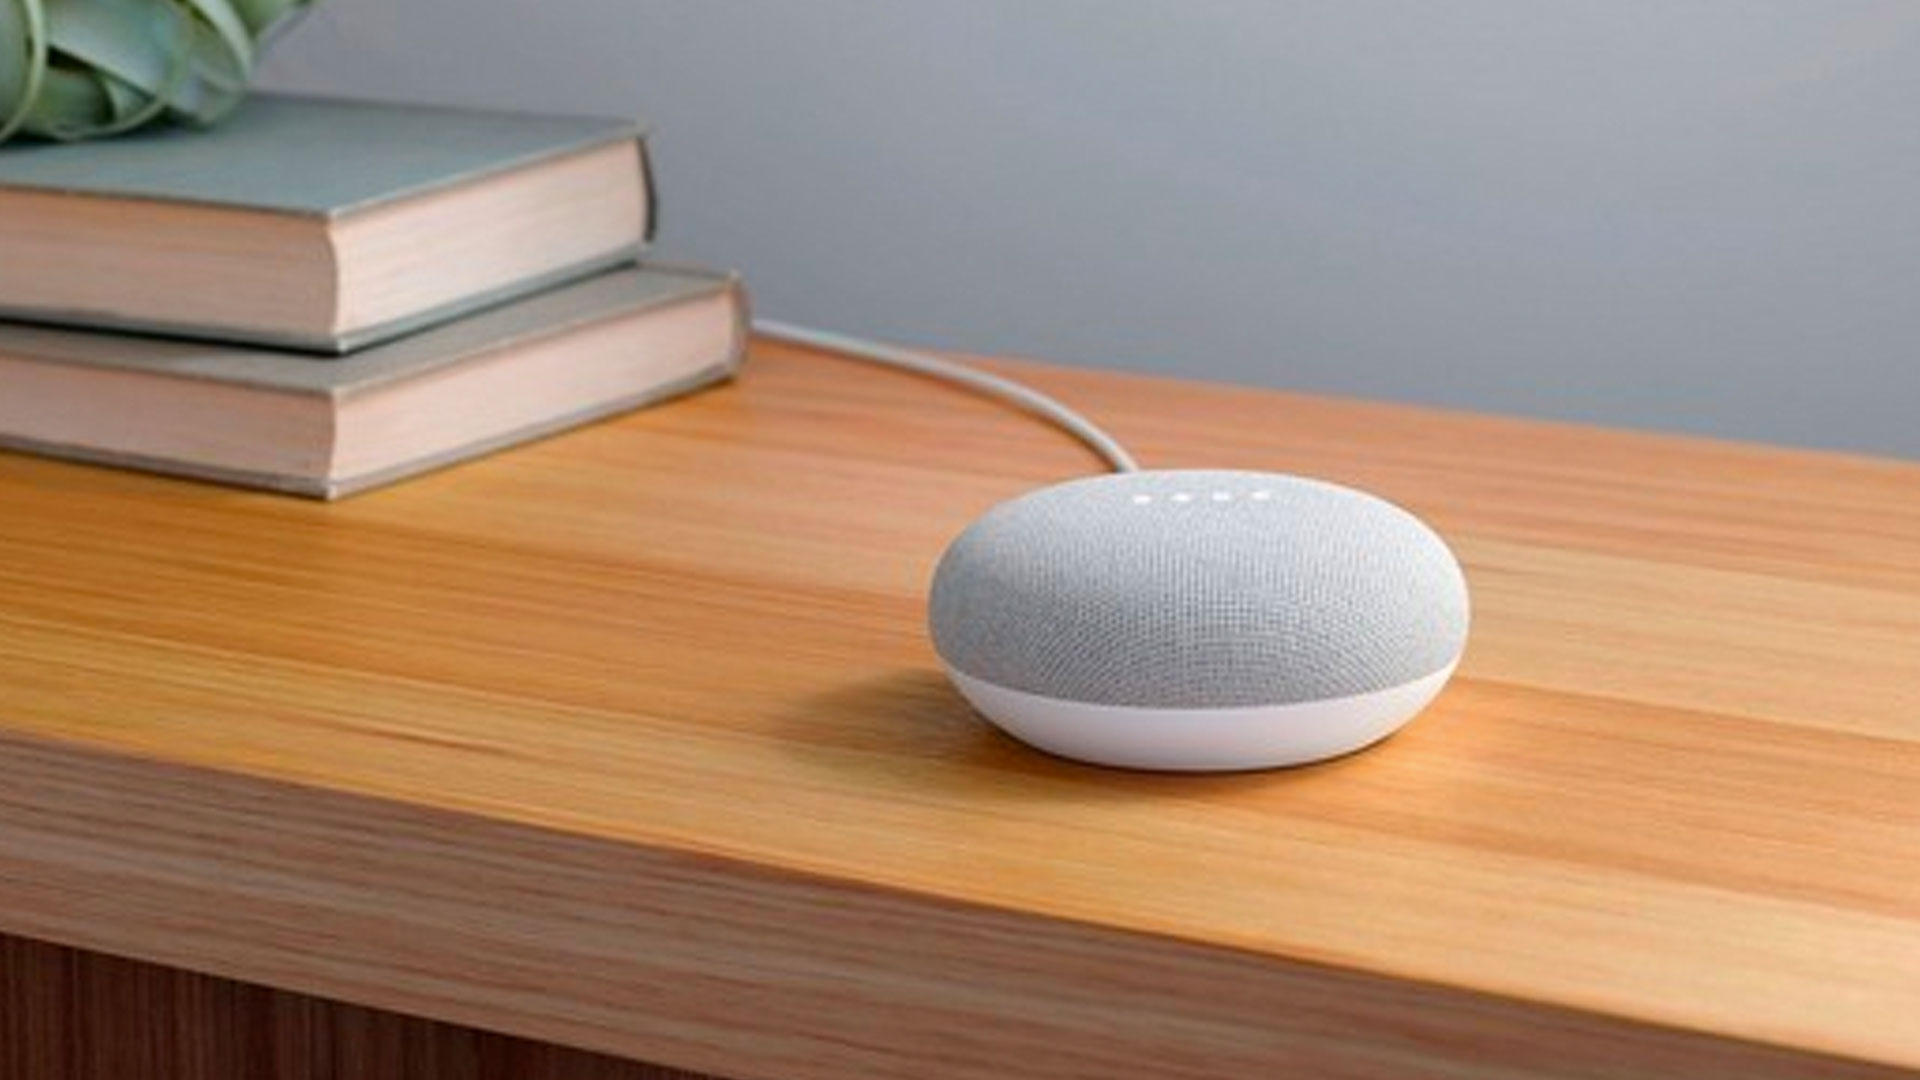 The Google Home Mini Is On Sale For Just 29 Gamesradar